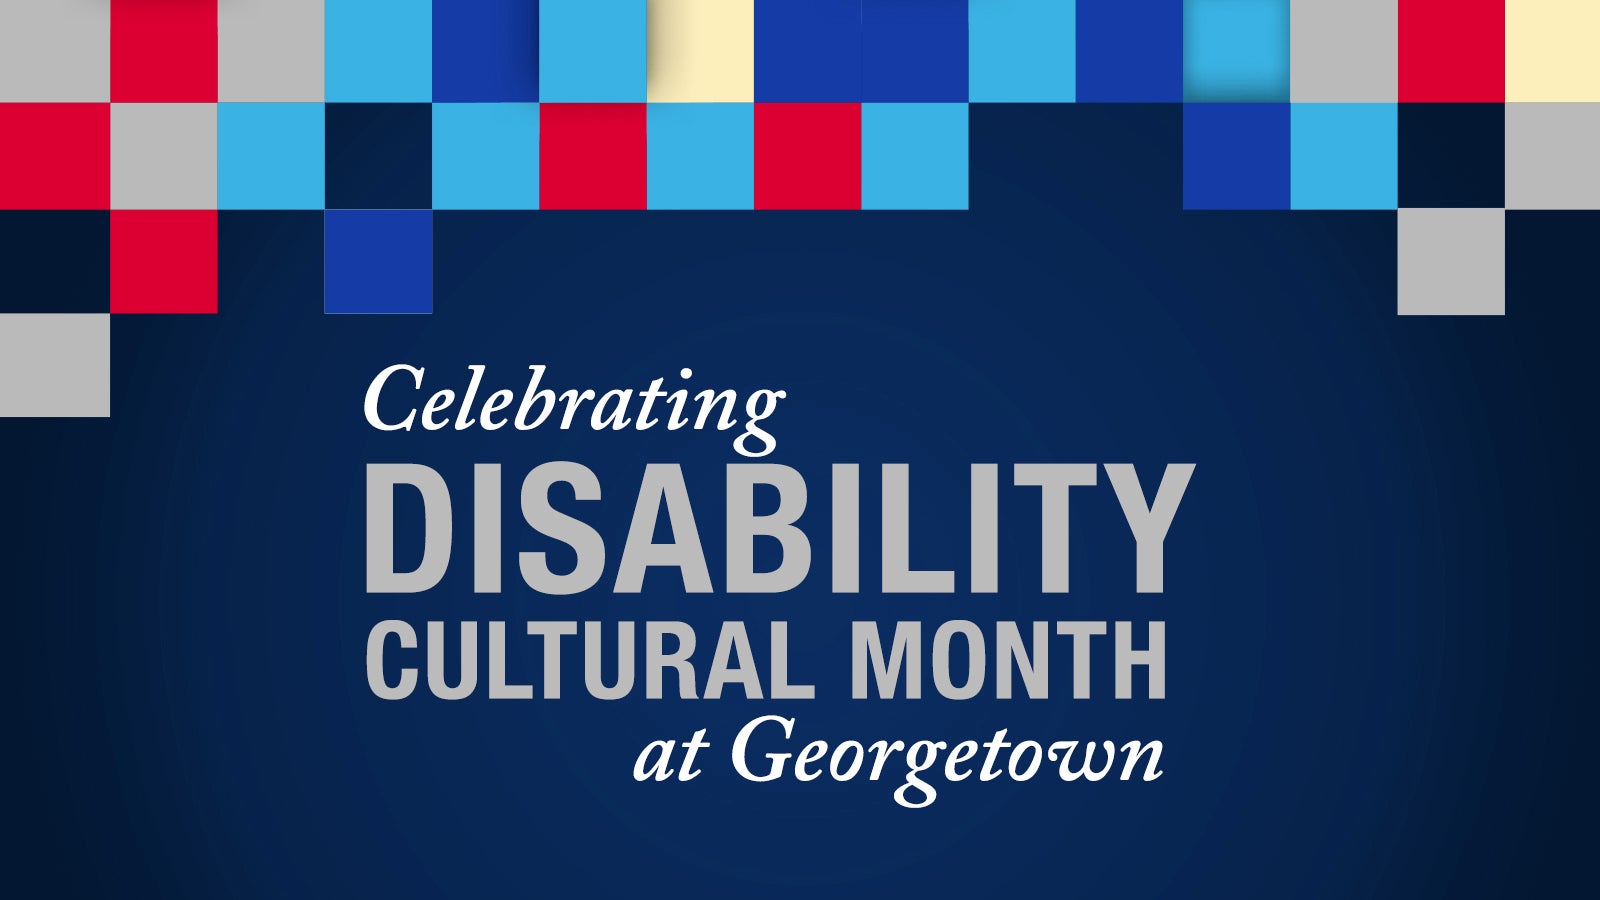 Dark blue graphic with blue, gray, red and yellow squares at the top with the text "Celebrating Disability Cultural Month at Georgetown"